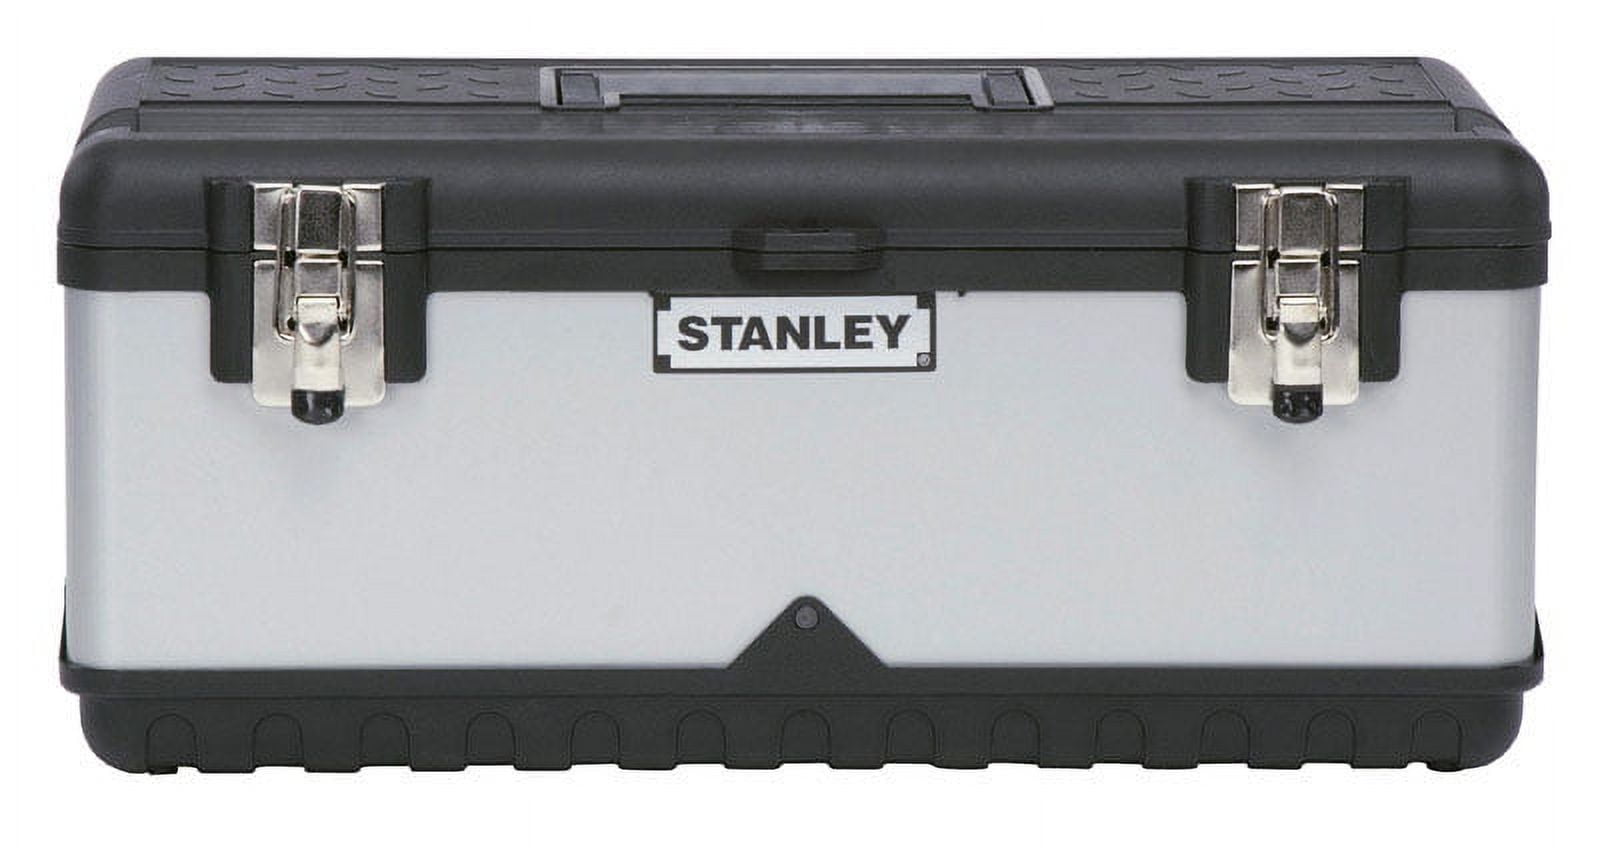 Stainless Steel Stanley Hand Tool Box Set, Size: 6 - 8 Inches(length